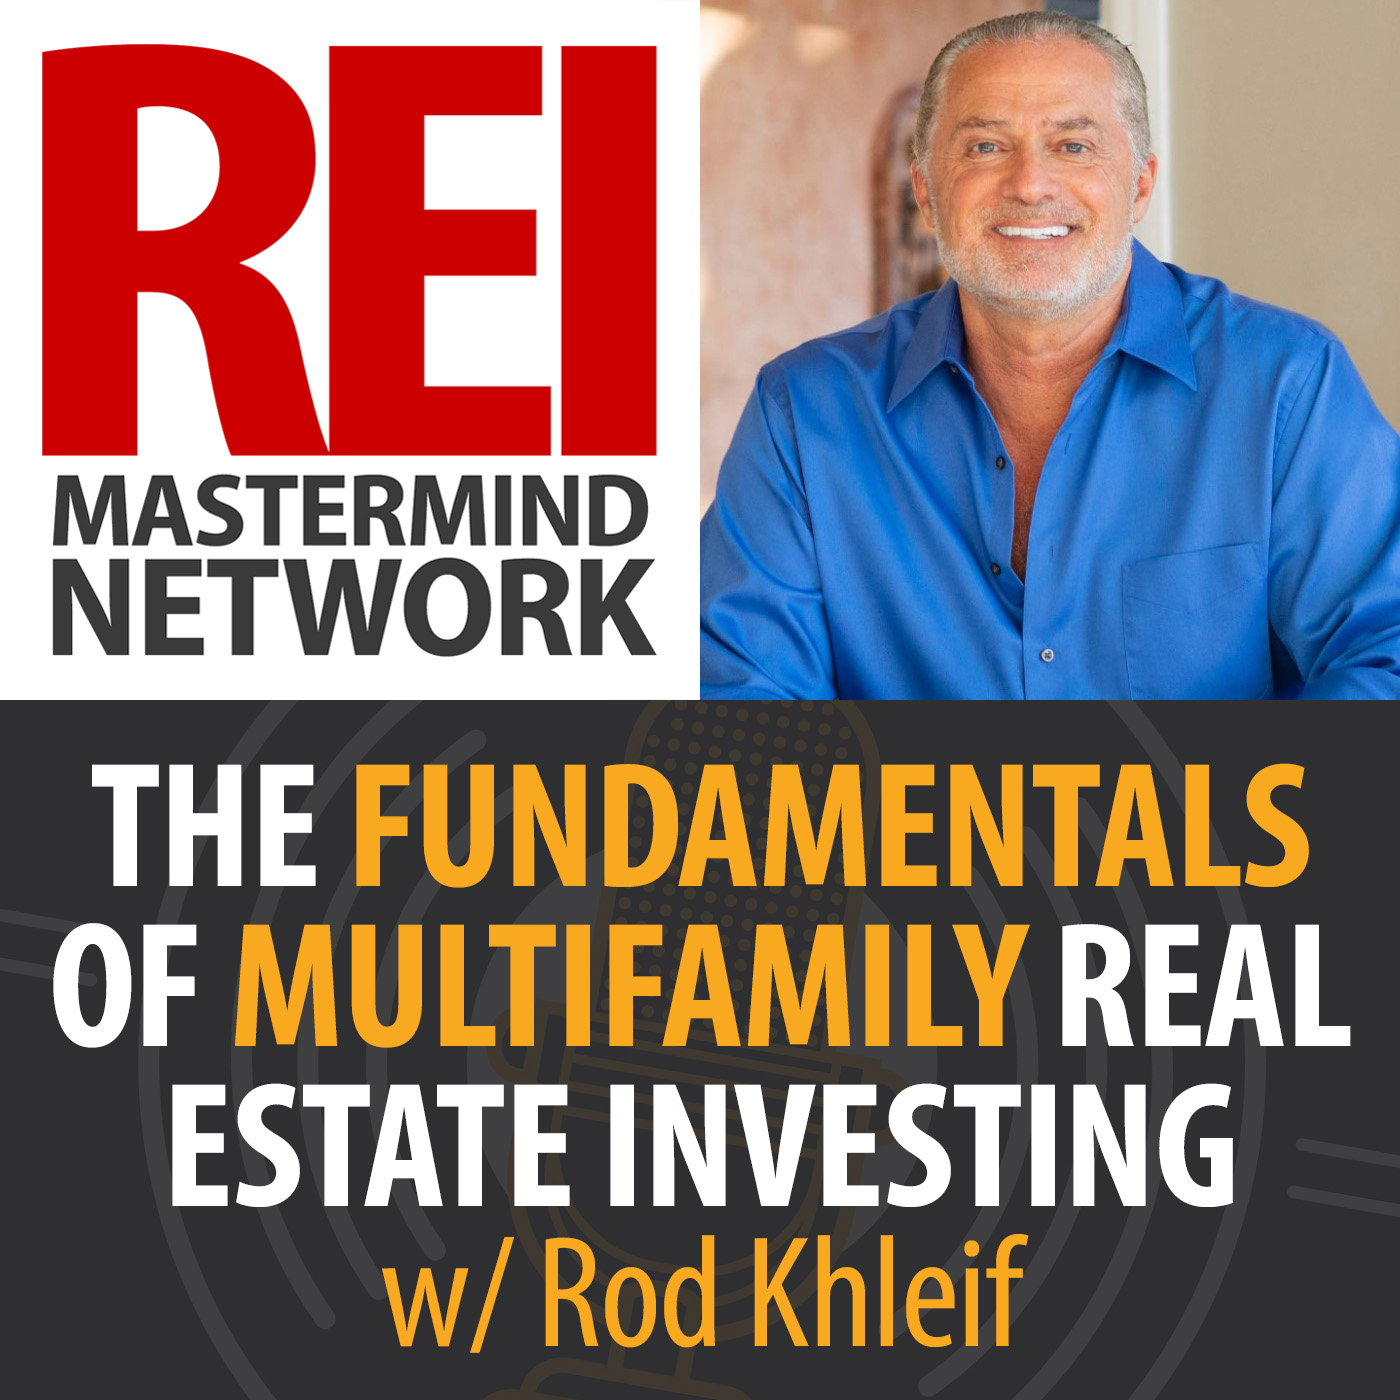 The Fundamentals of Multifamily Real Estate Investing with Rod Khleif